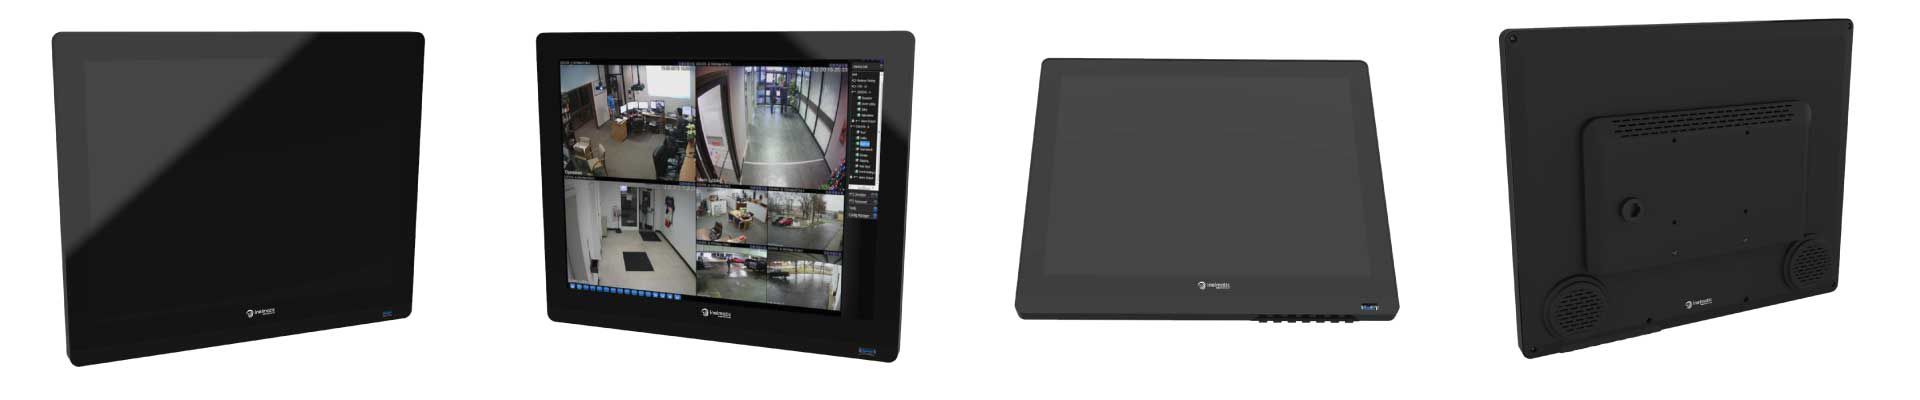 Resistive & Multi-touch Projected Capacitive touch panel - Inelmatic